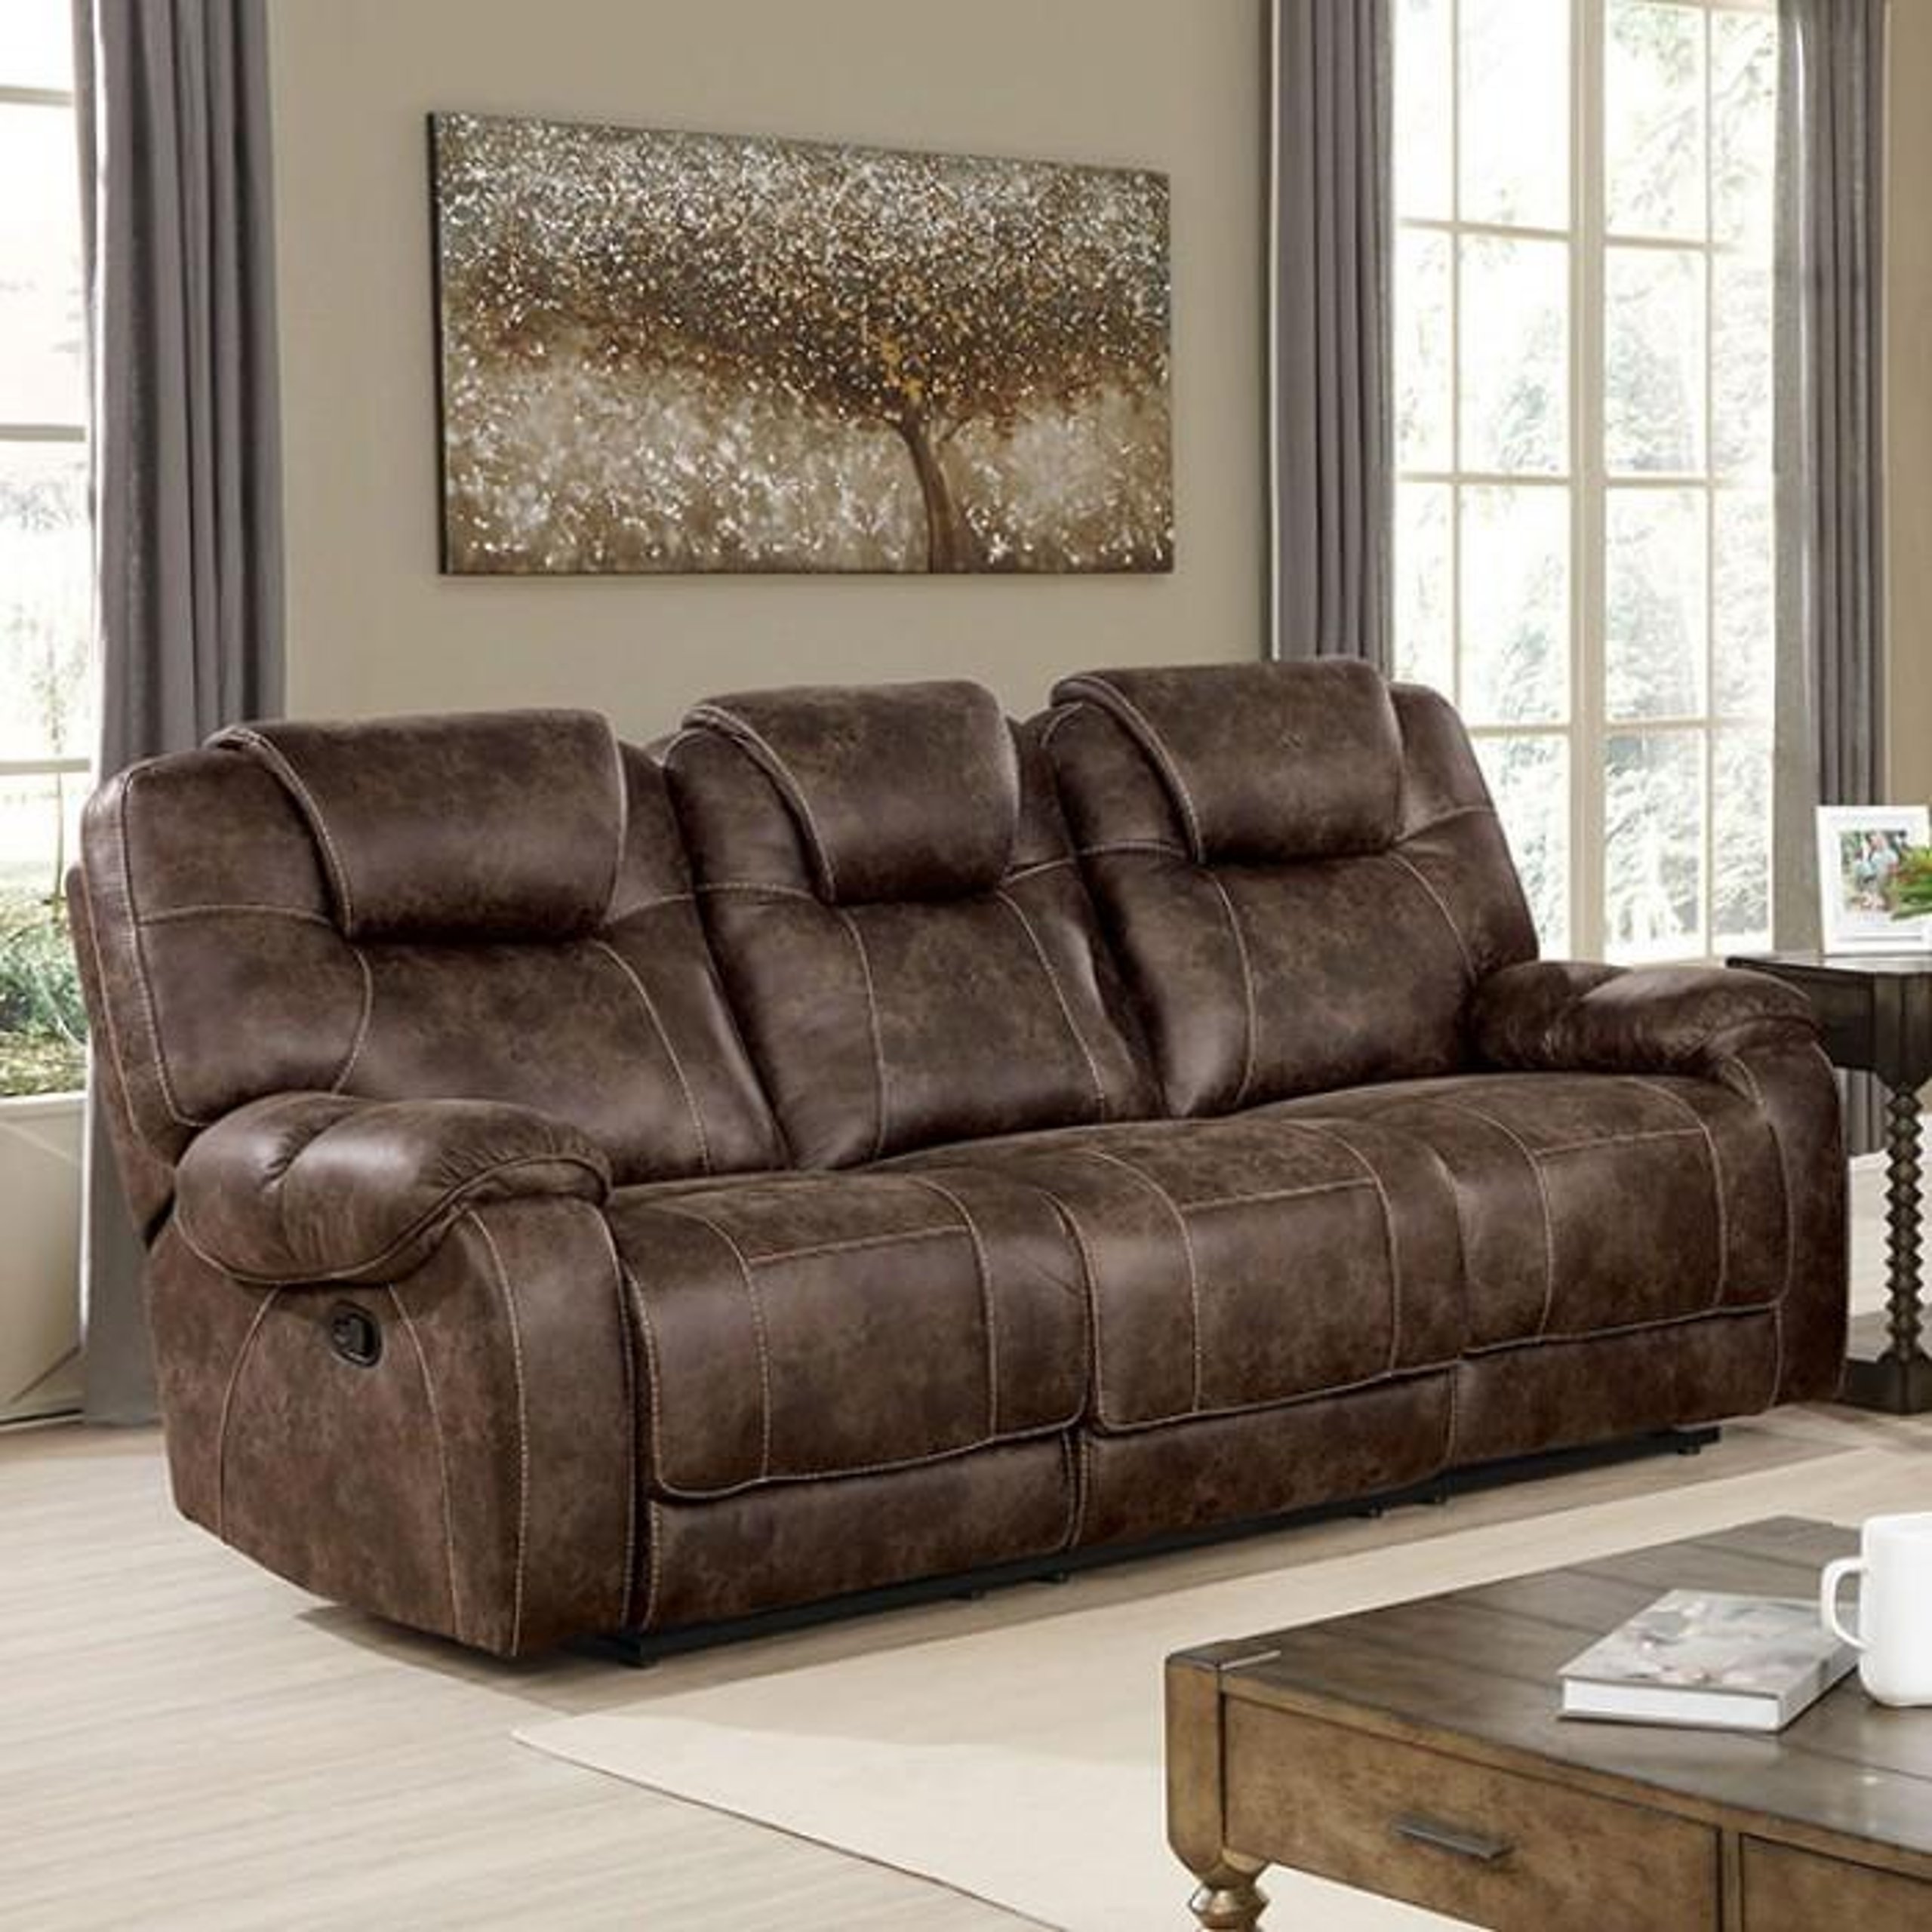 Furniture of America Pollux Brown 2pc Living Room Set with Console